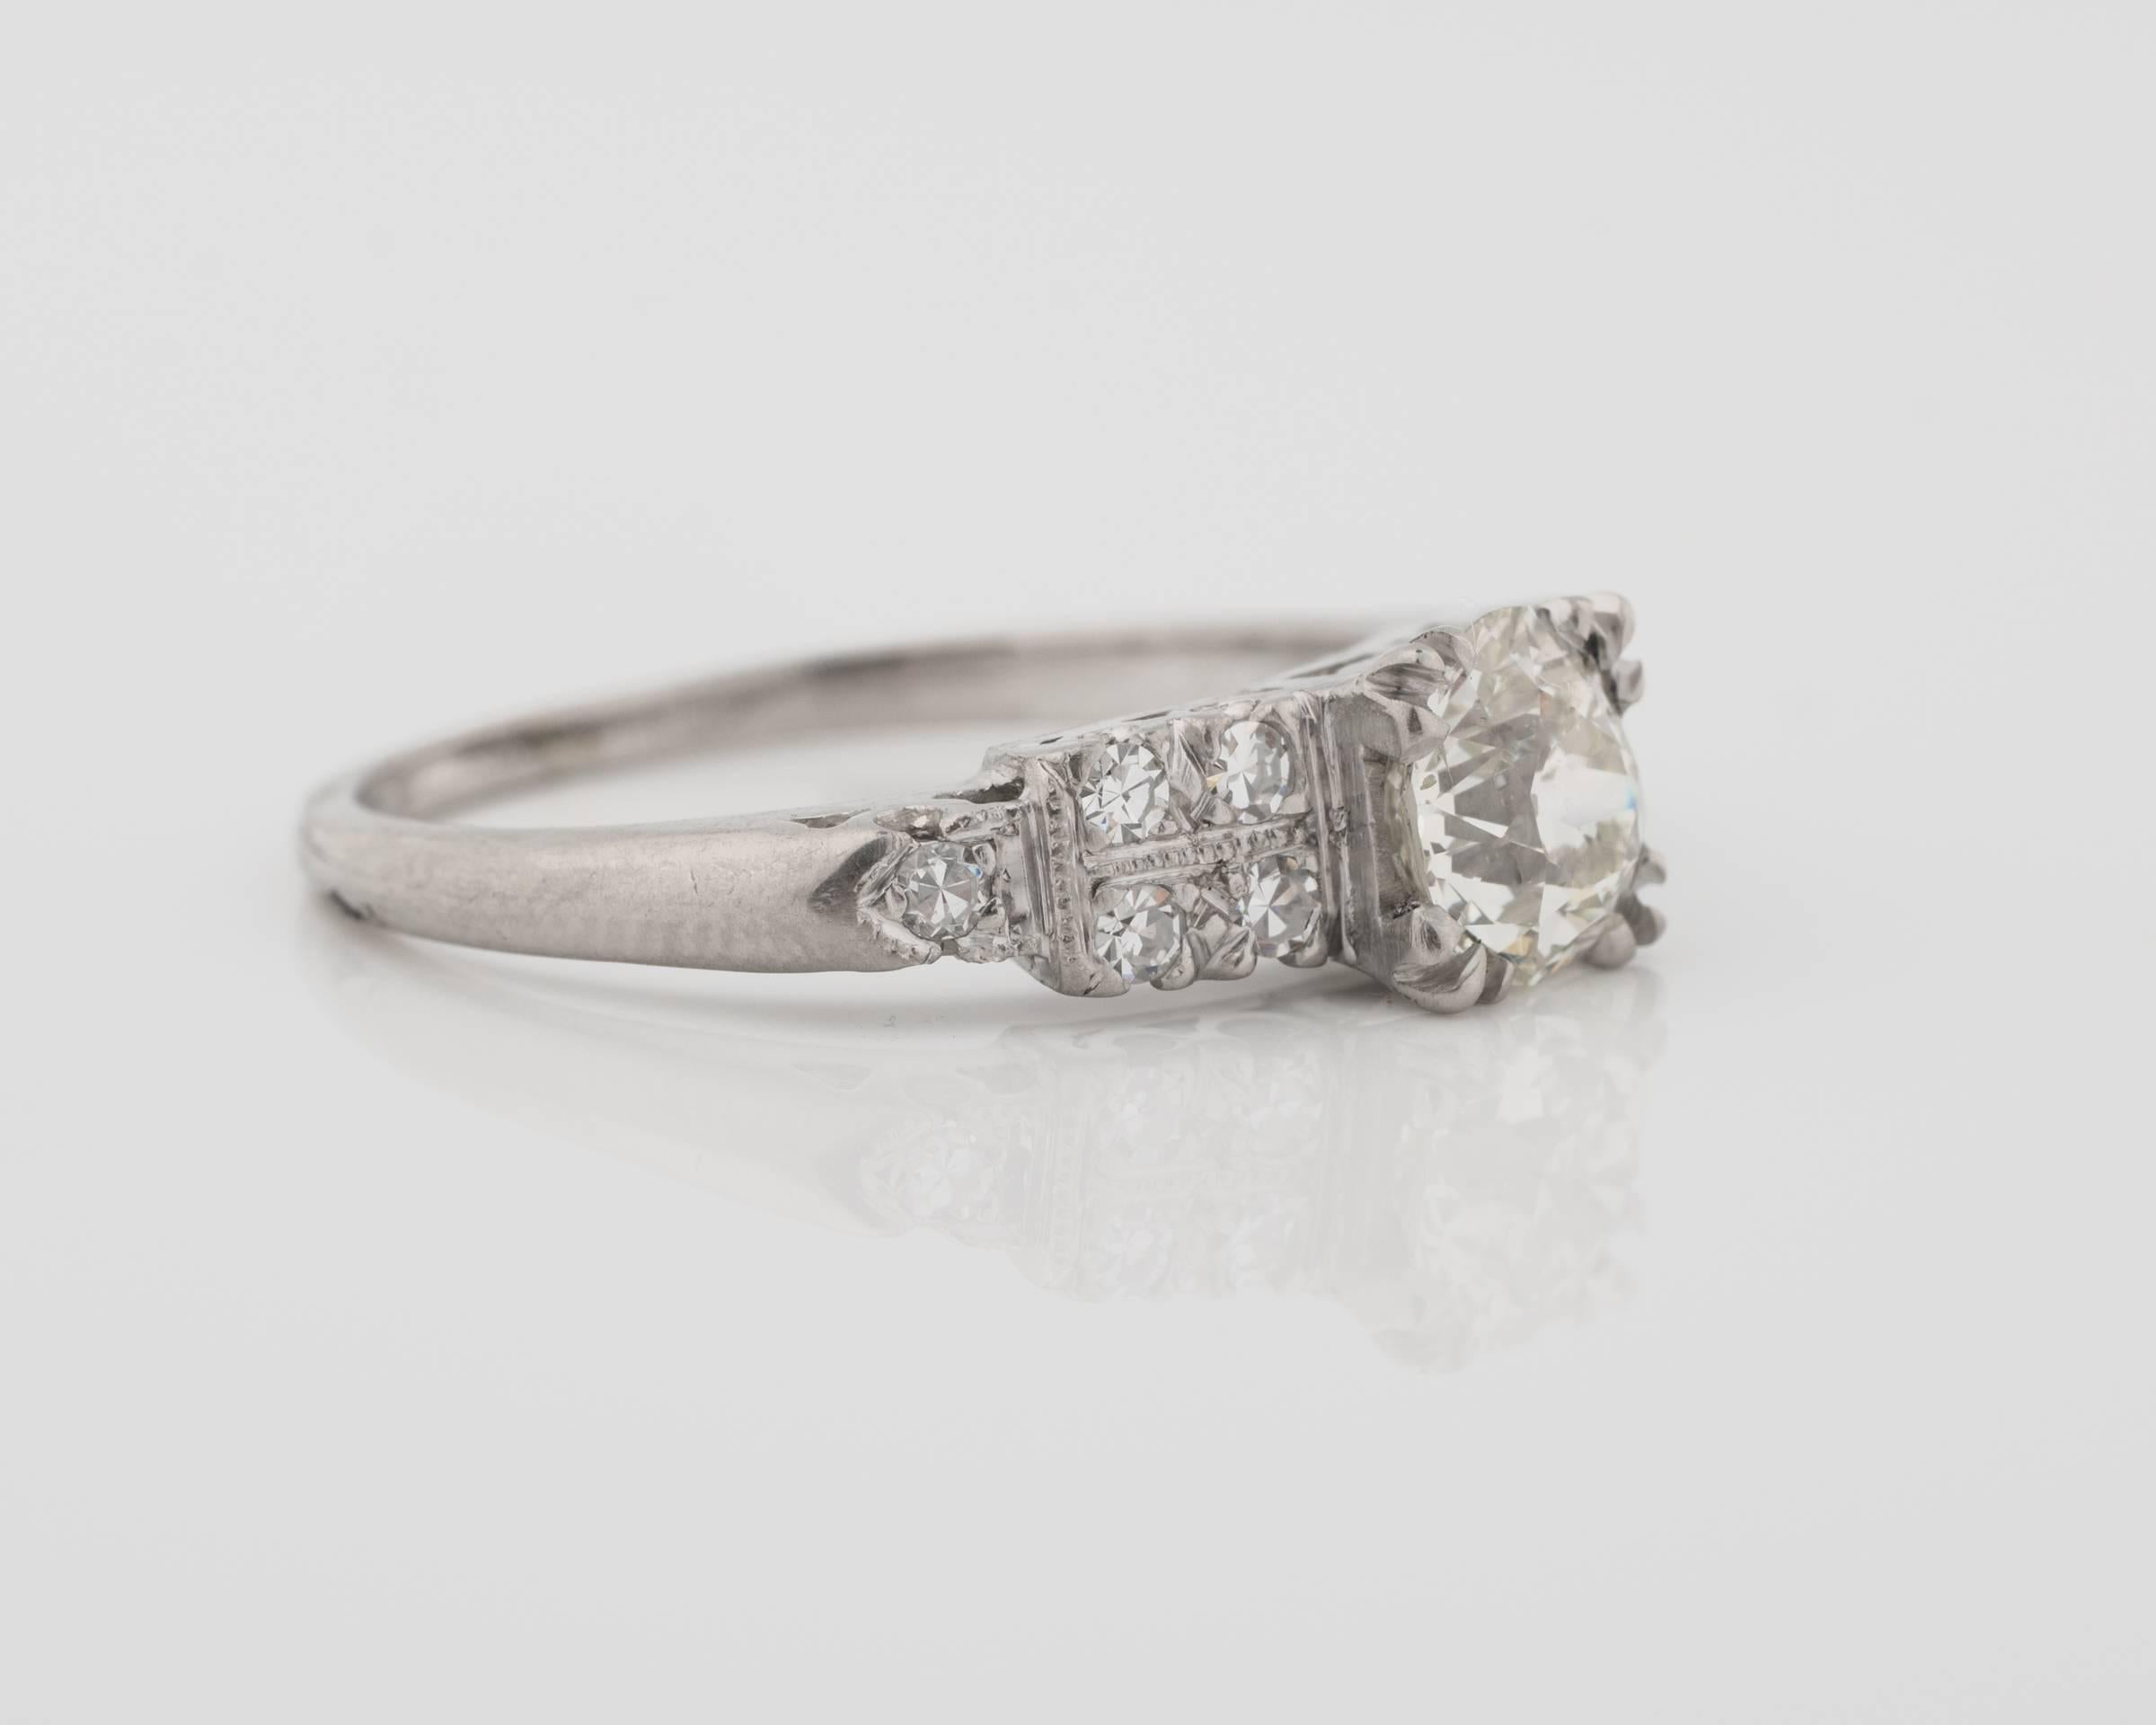 1930s GIA 1.01 Carat Old European Diamond Platinum Engagement Ring. Features a GIA Certified 1.01 carat center stone in a fishtail prong setting. 10 prong set Single Cut Round Accent Diamonds flank the center stone. The accent diamond settings have